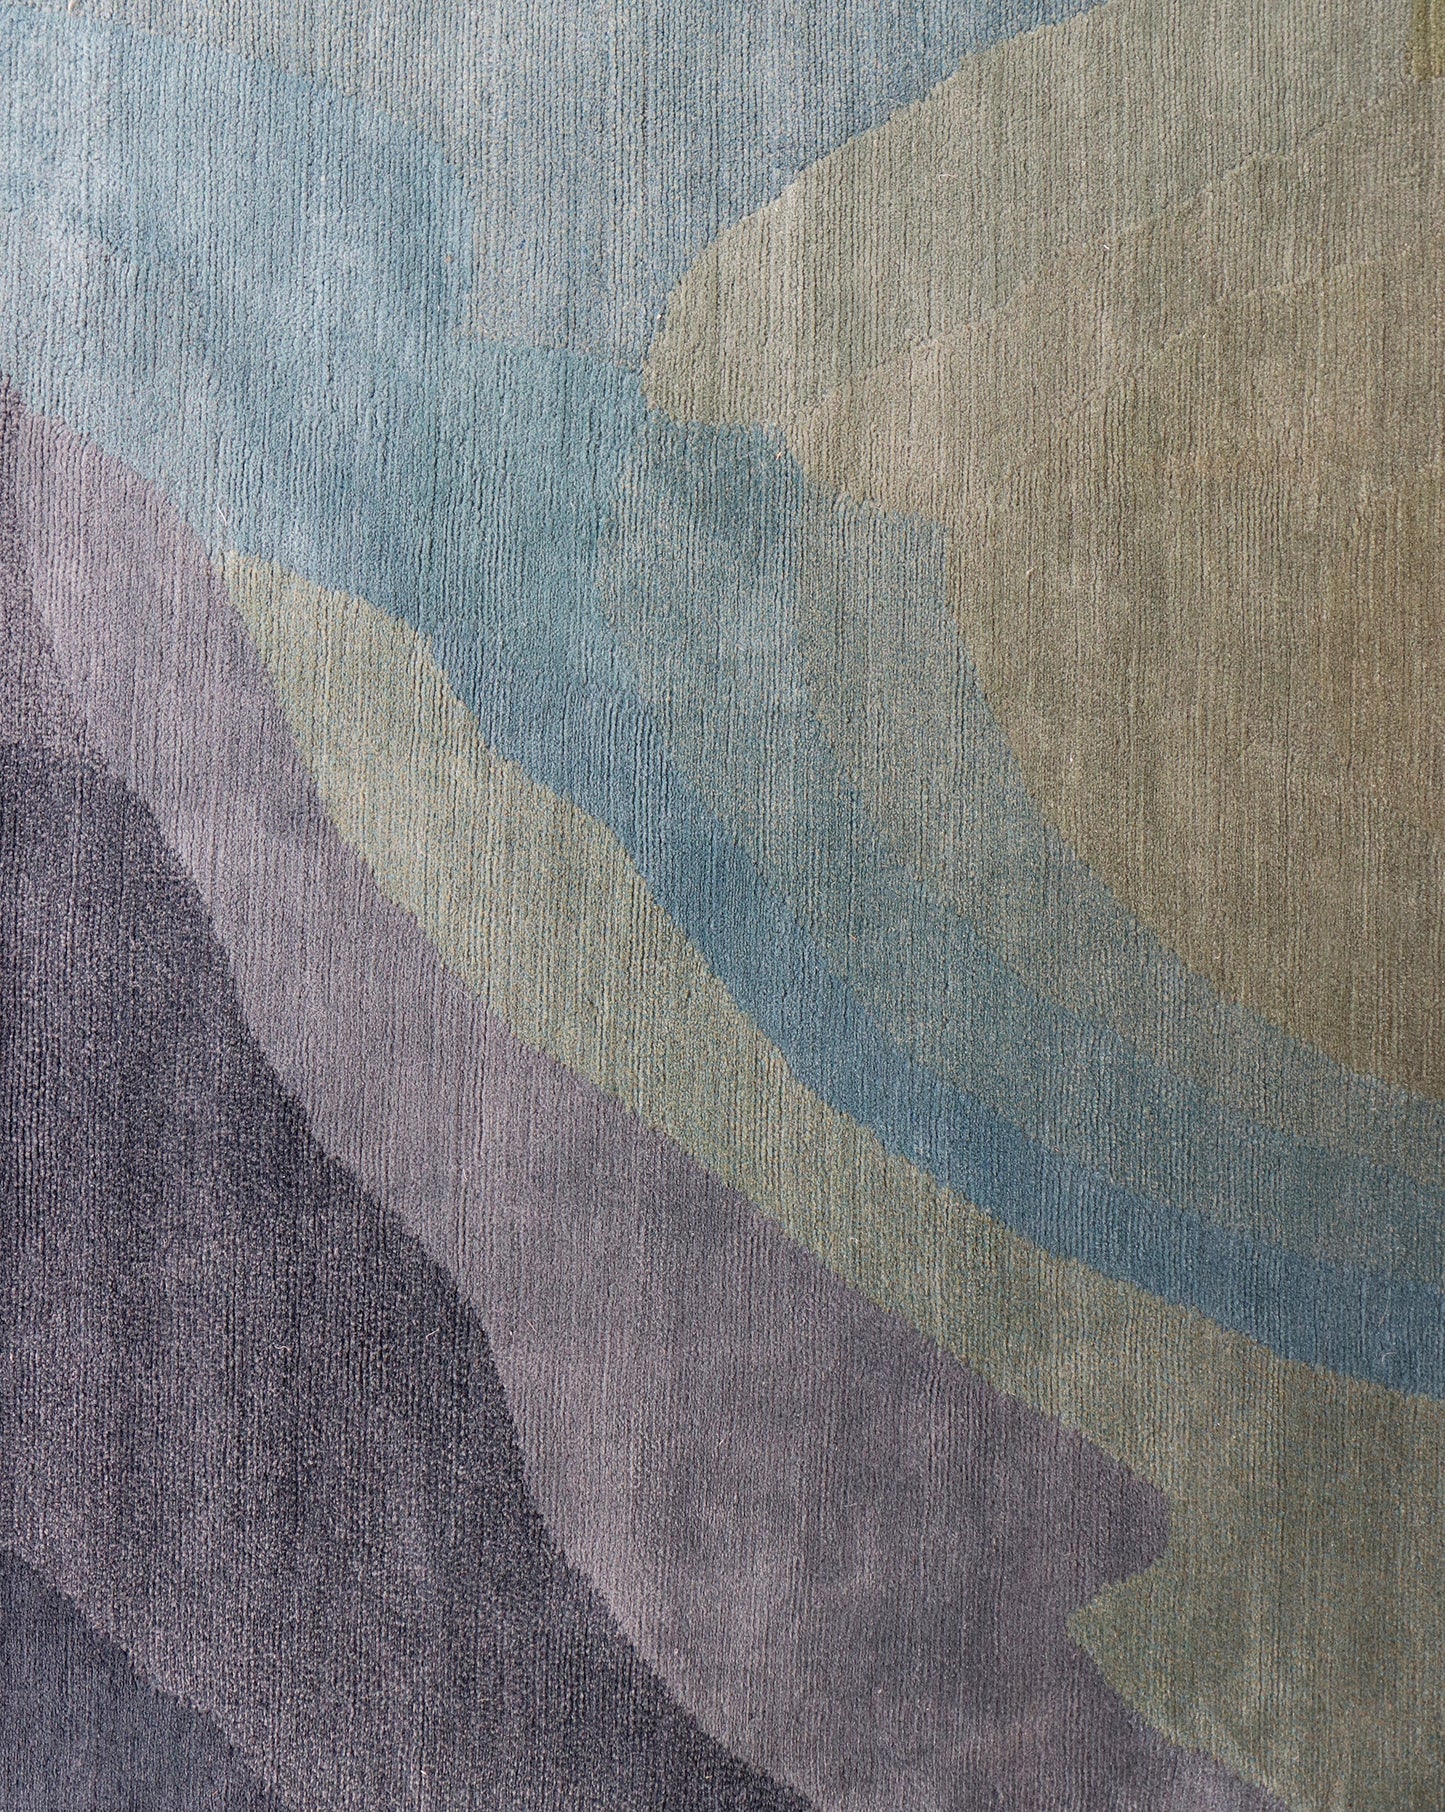 Experience the chromatic beauty of nature in the Progressions Hand Knotted Rug 5' x 8' Thalassa colorway of our hand-knotted rug collection.